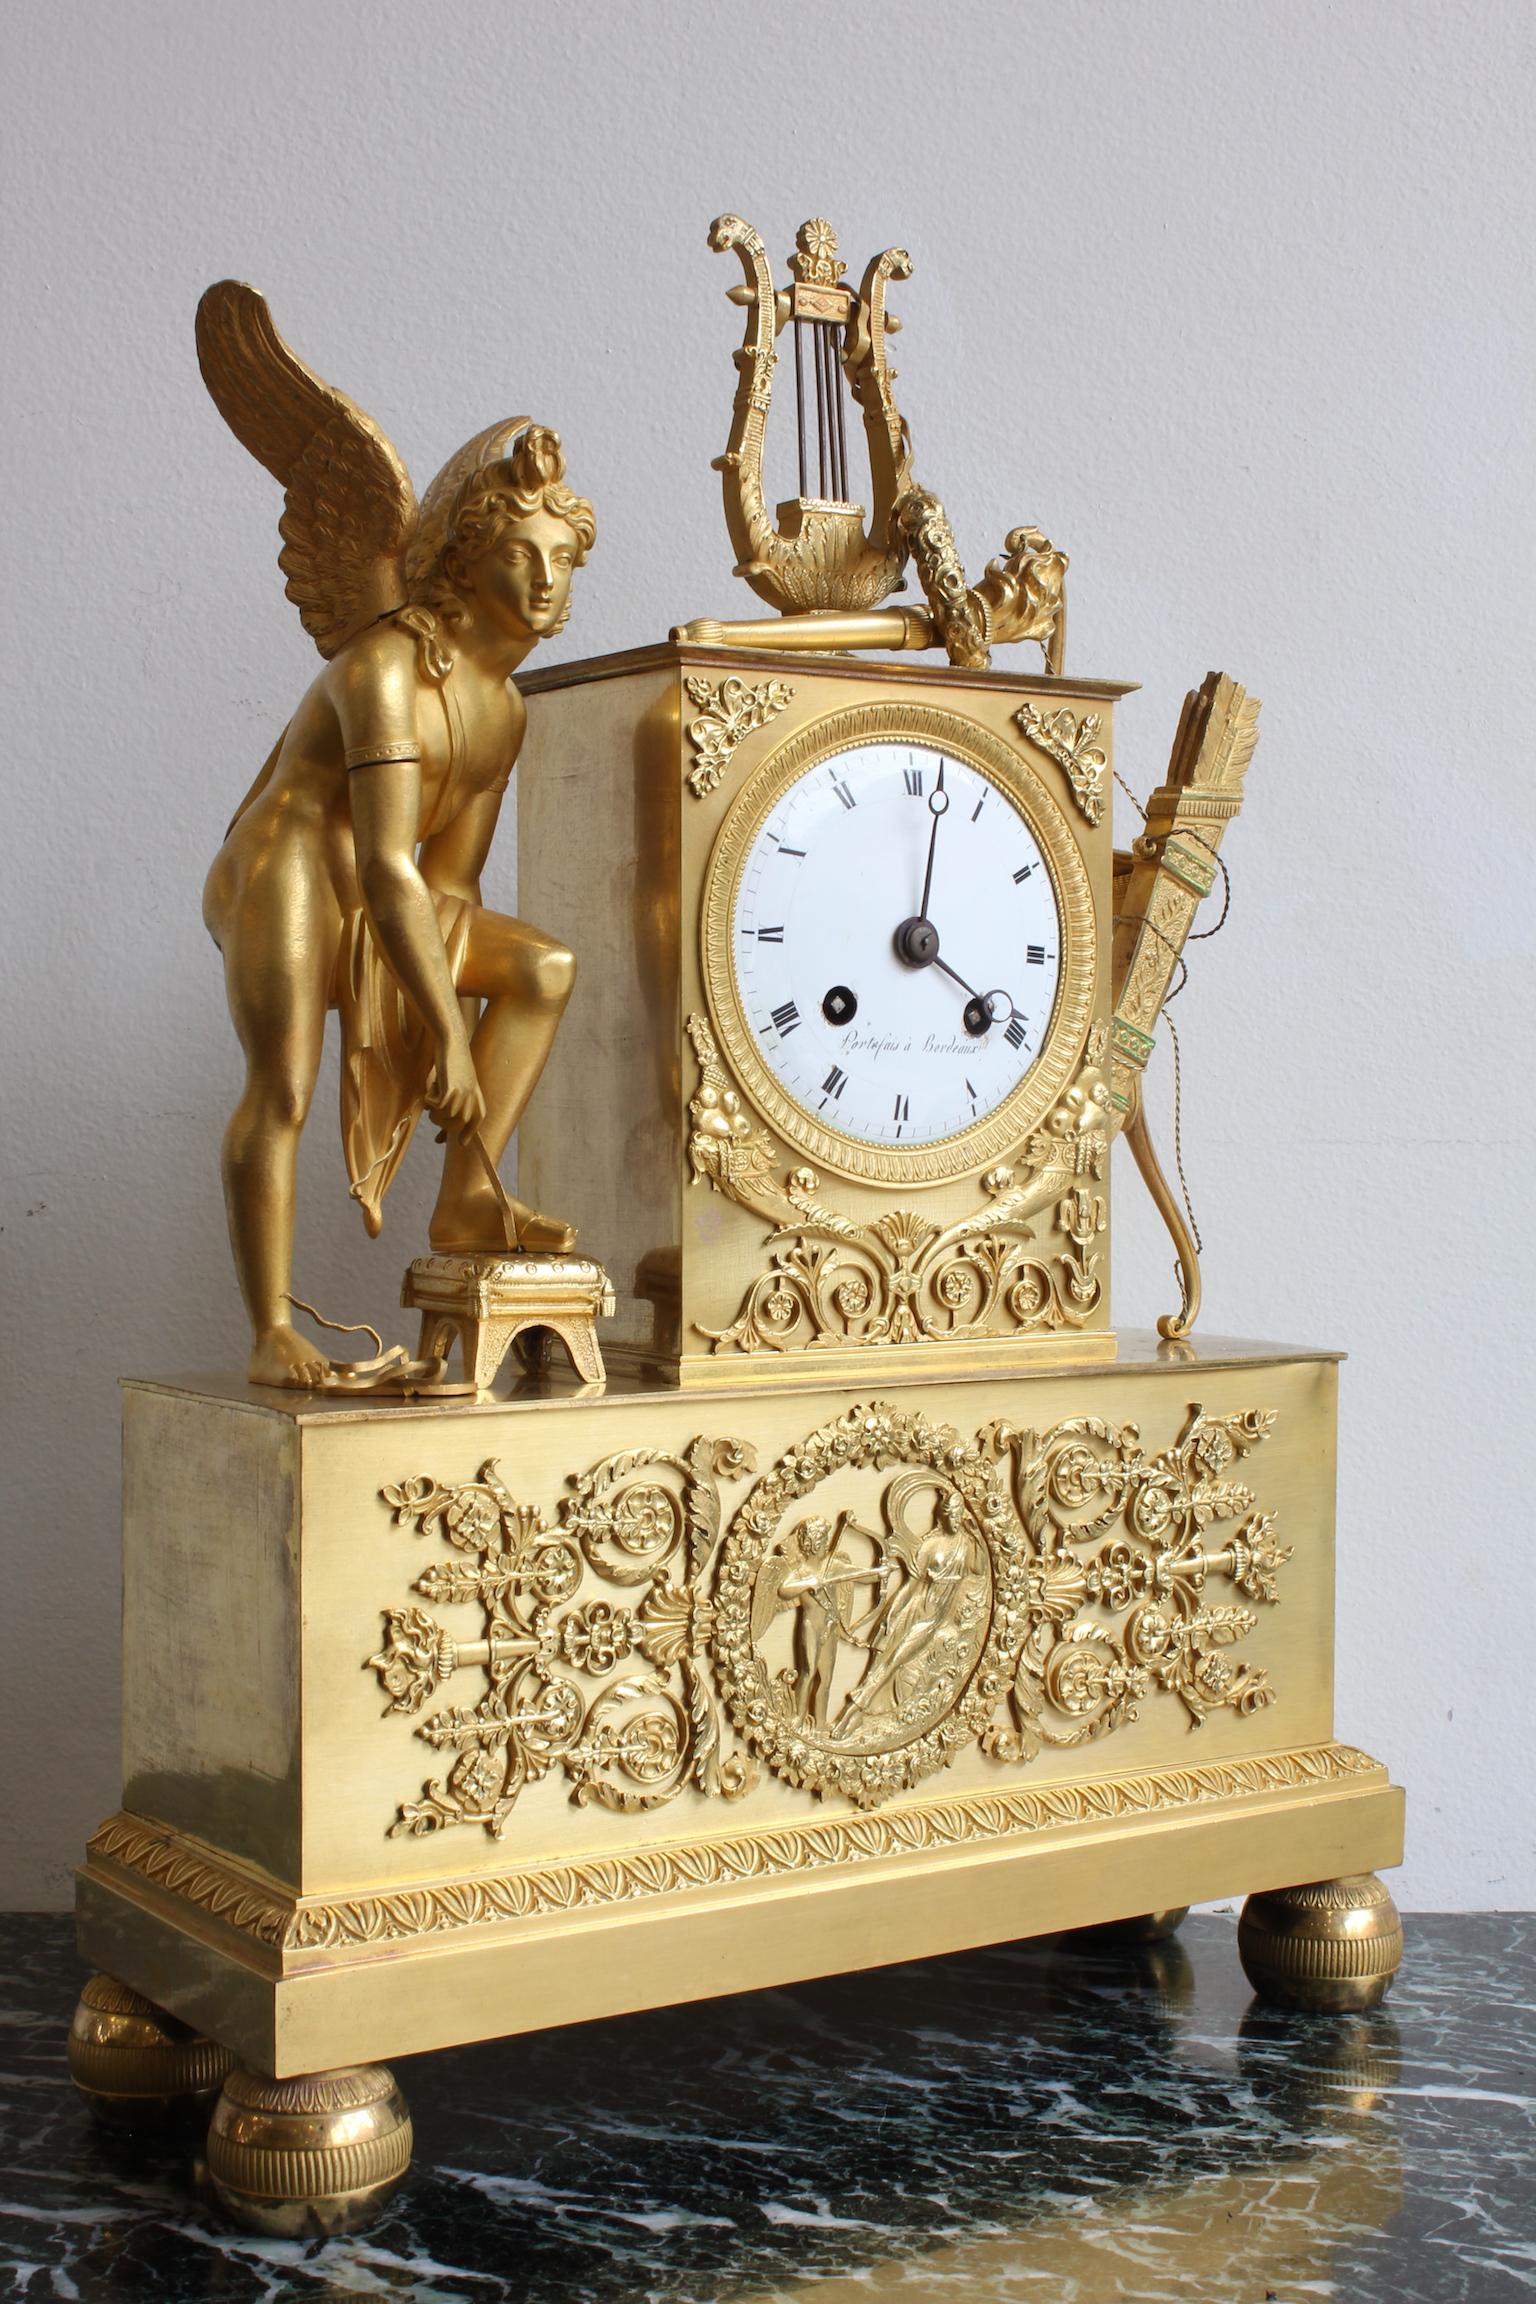 19th century Hermes clock with quiver and bow, in good condition.
Movement in working order.
Dimensions: Width 25.5cm, height 36cm, depth 9cm.